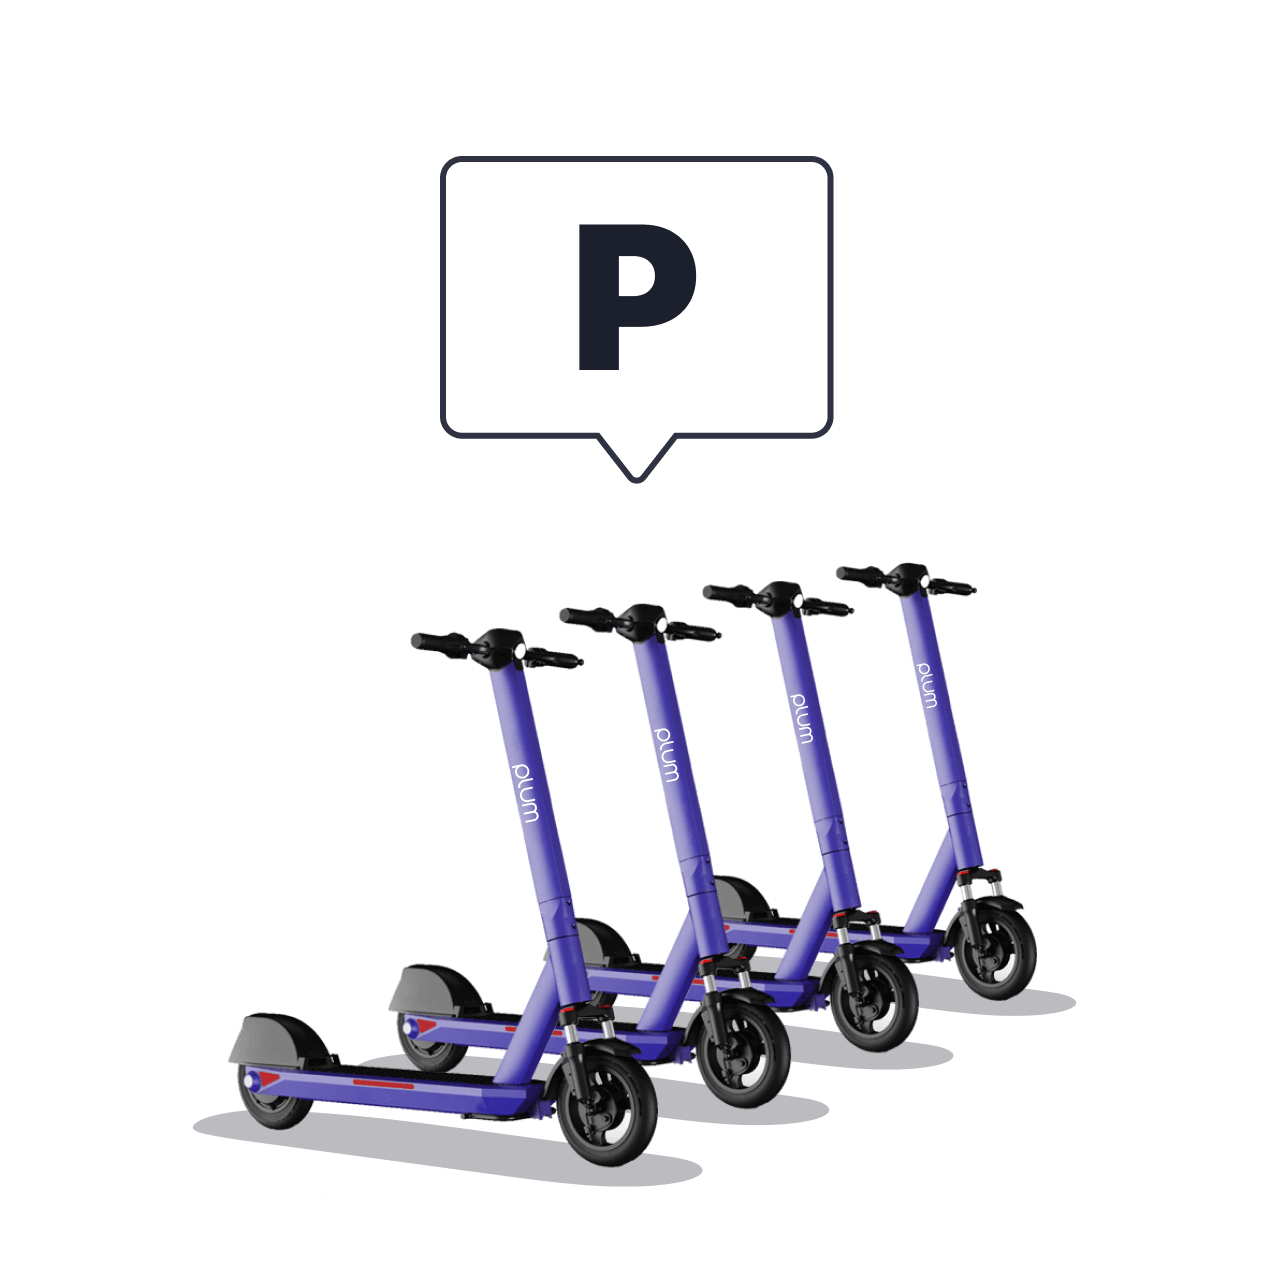 Plum e-scooters parked orderly with a parking sign above